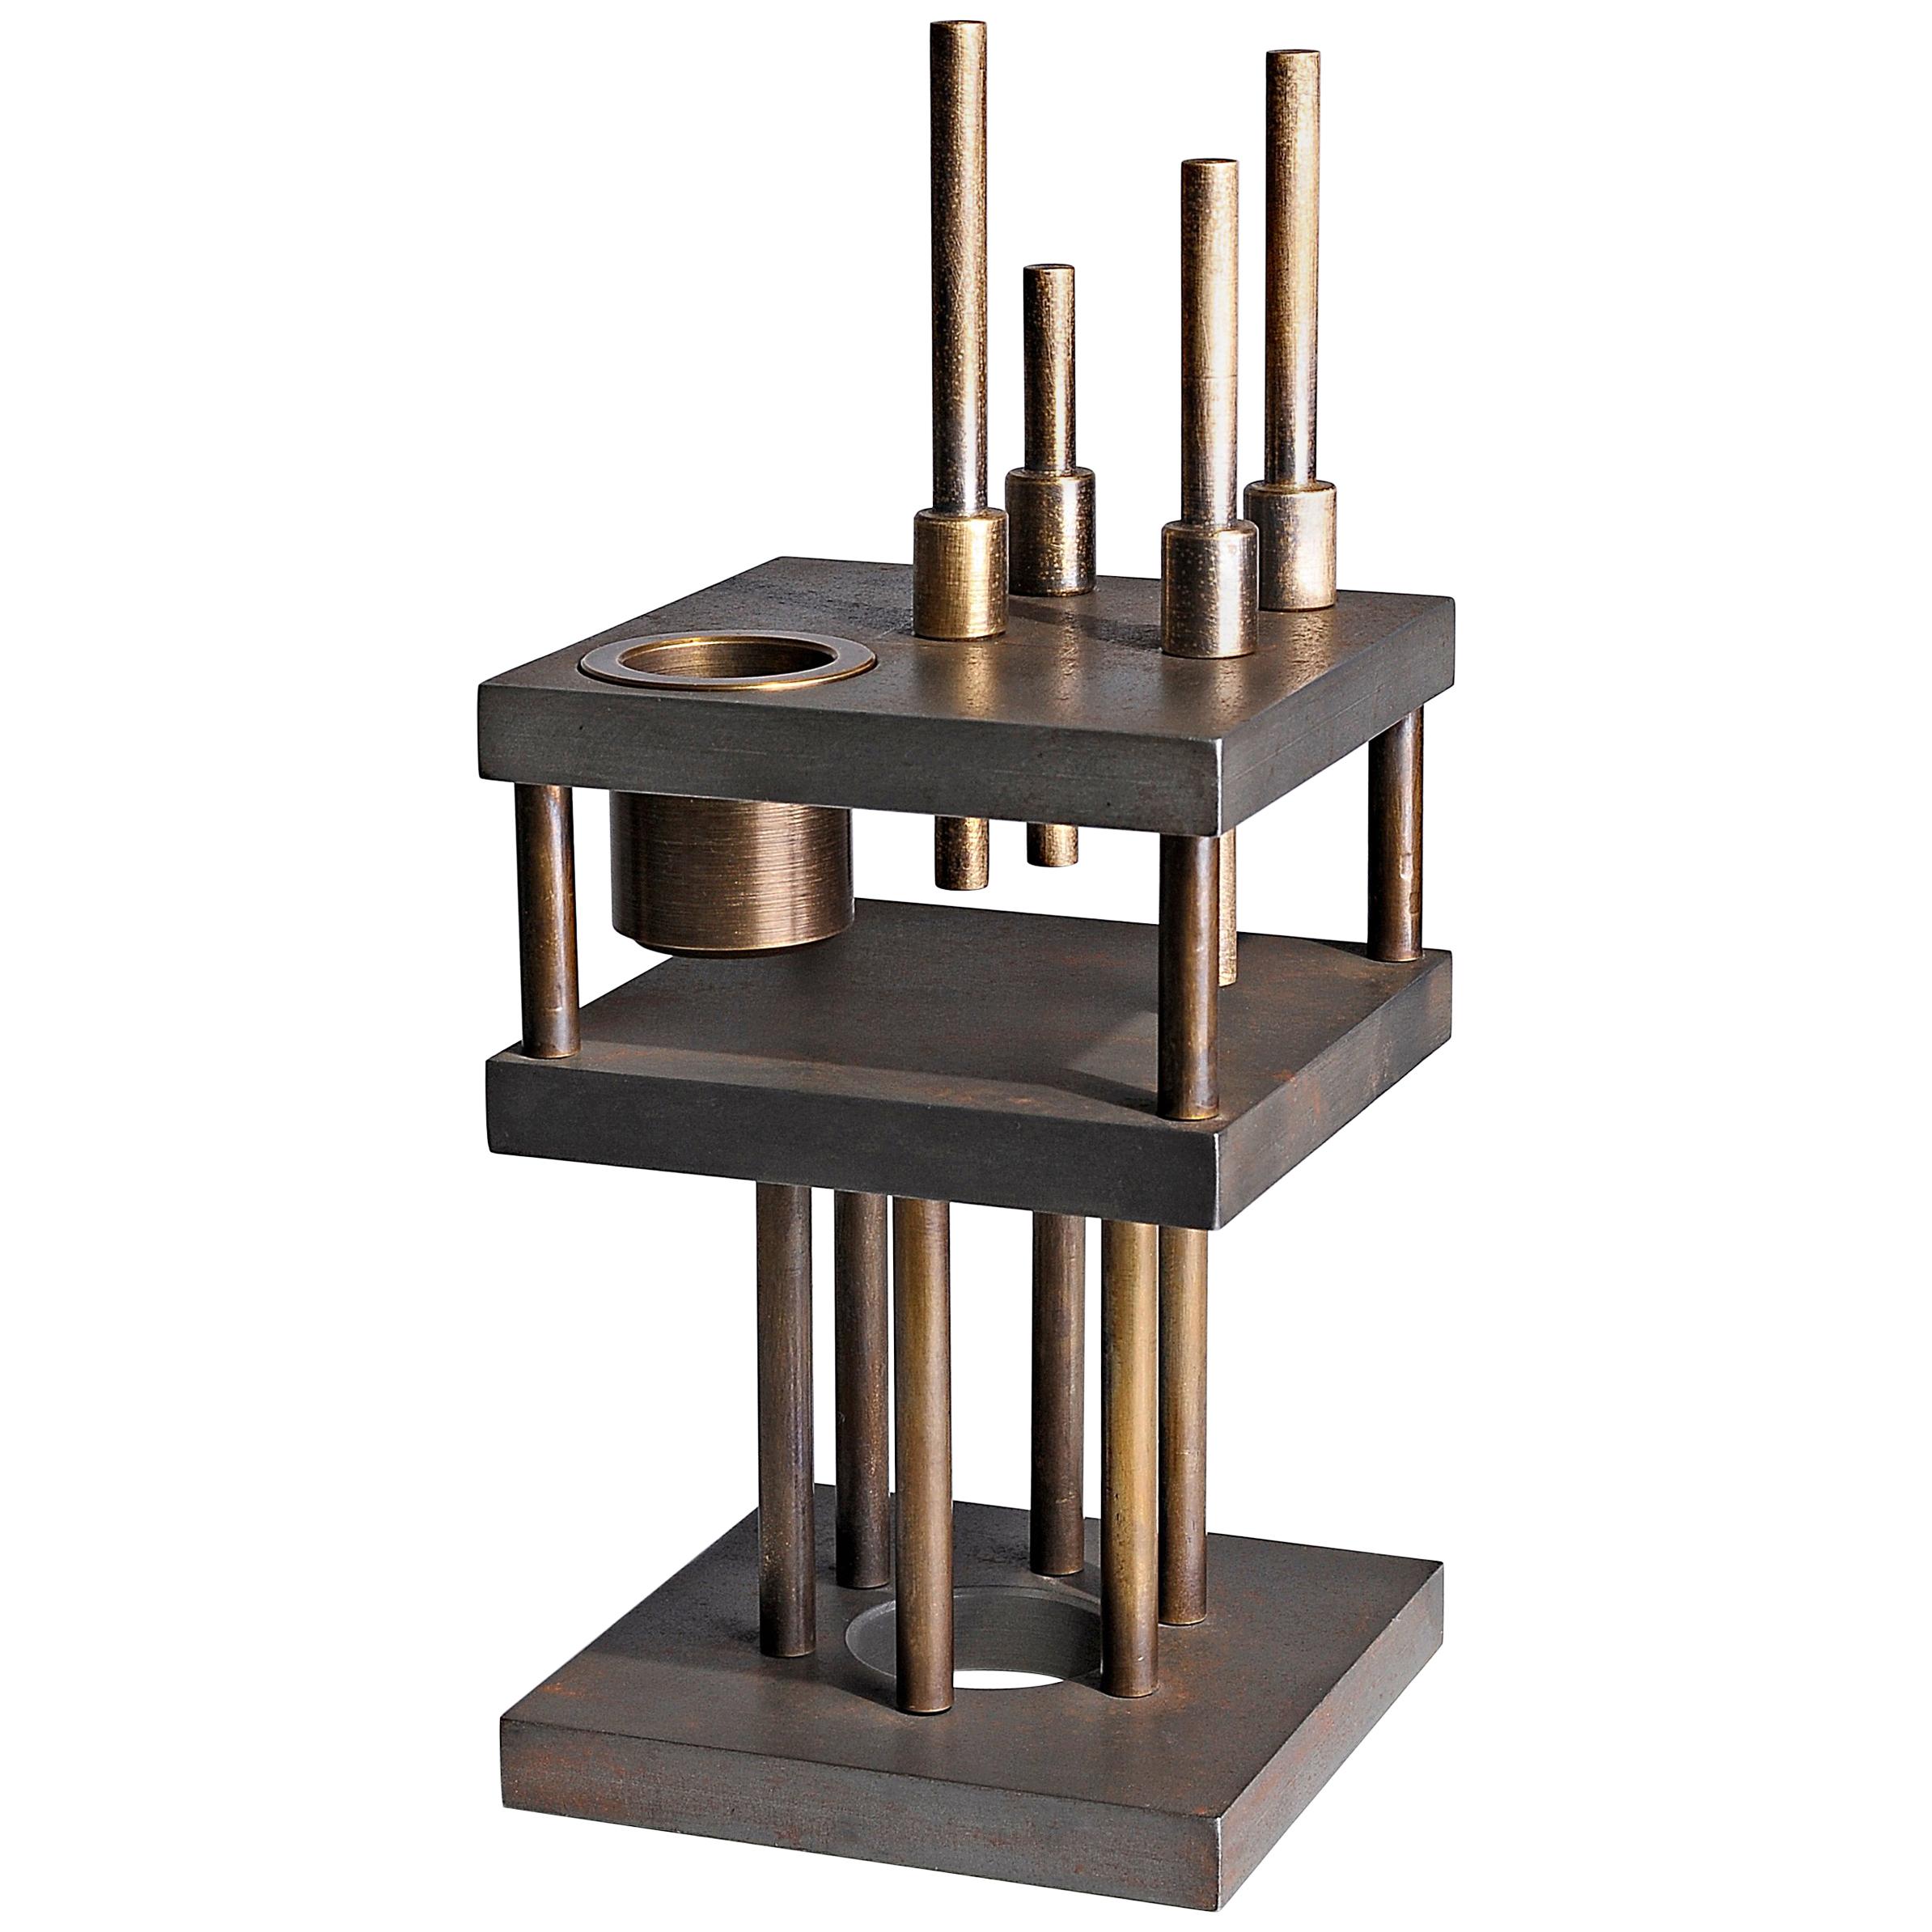 Unique Steel and Brass Candleholder “Brut”, Signed by Lukasz Friedrich